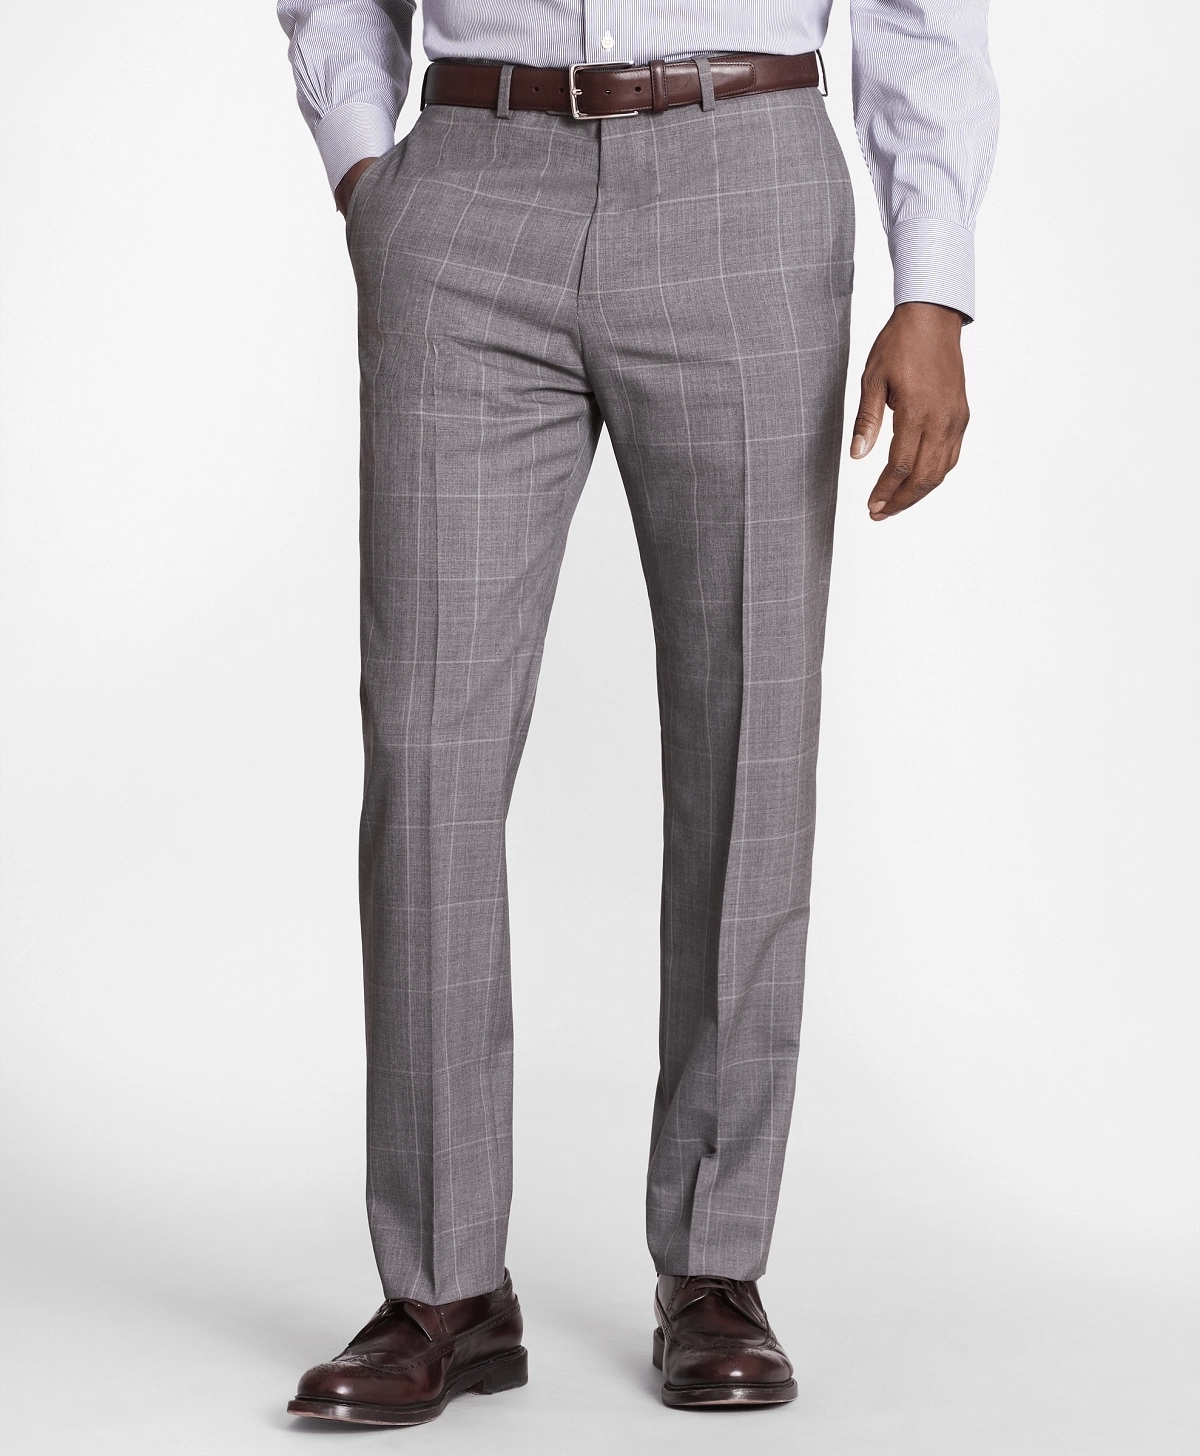 Brooks Brothers Replacement Suit Pants Top Sellers  dainikhitnewscom  1691170028